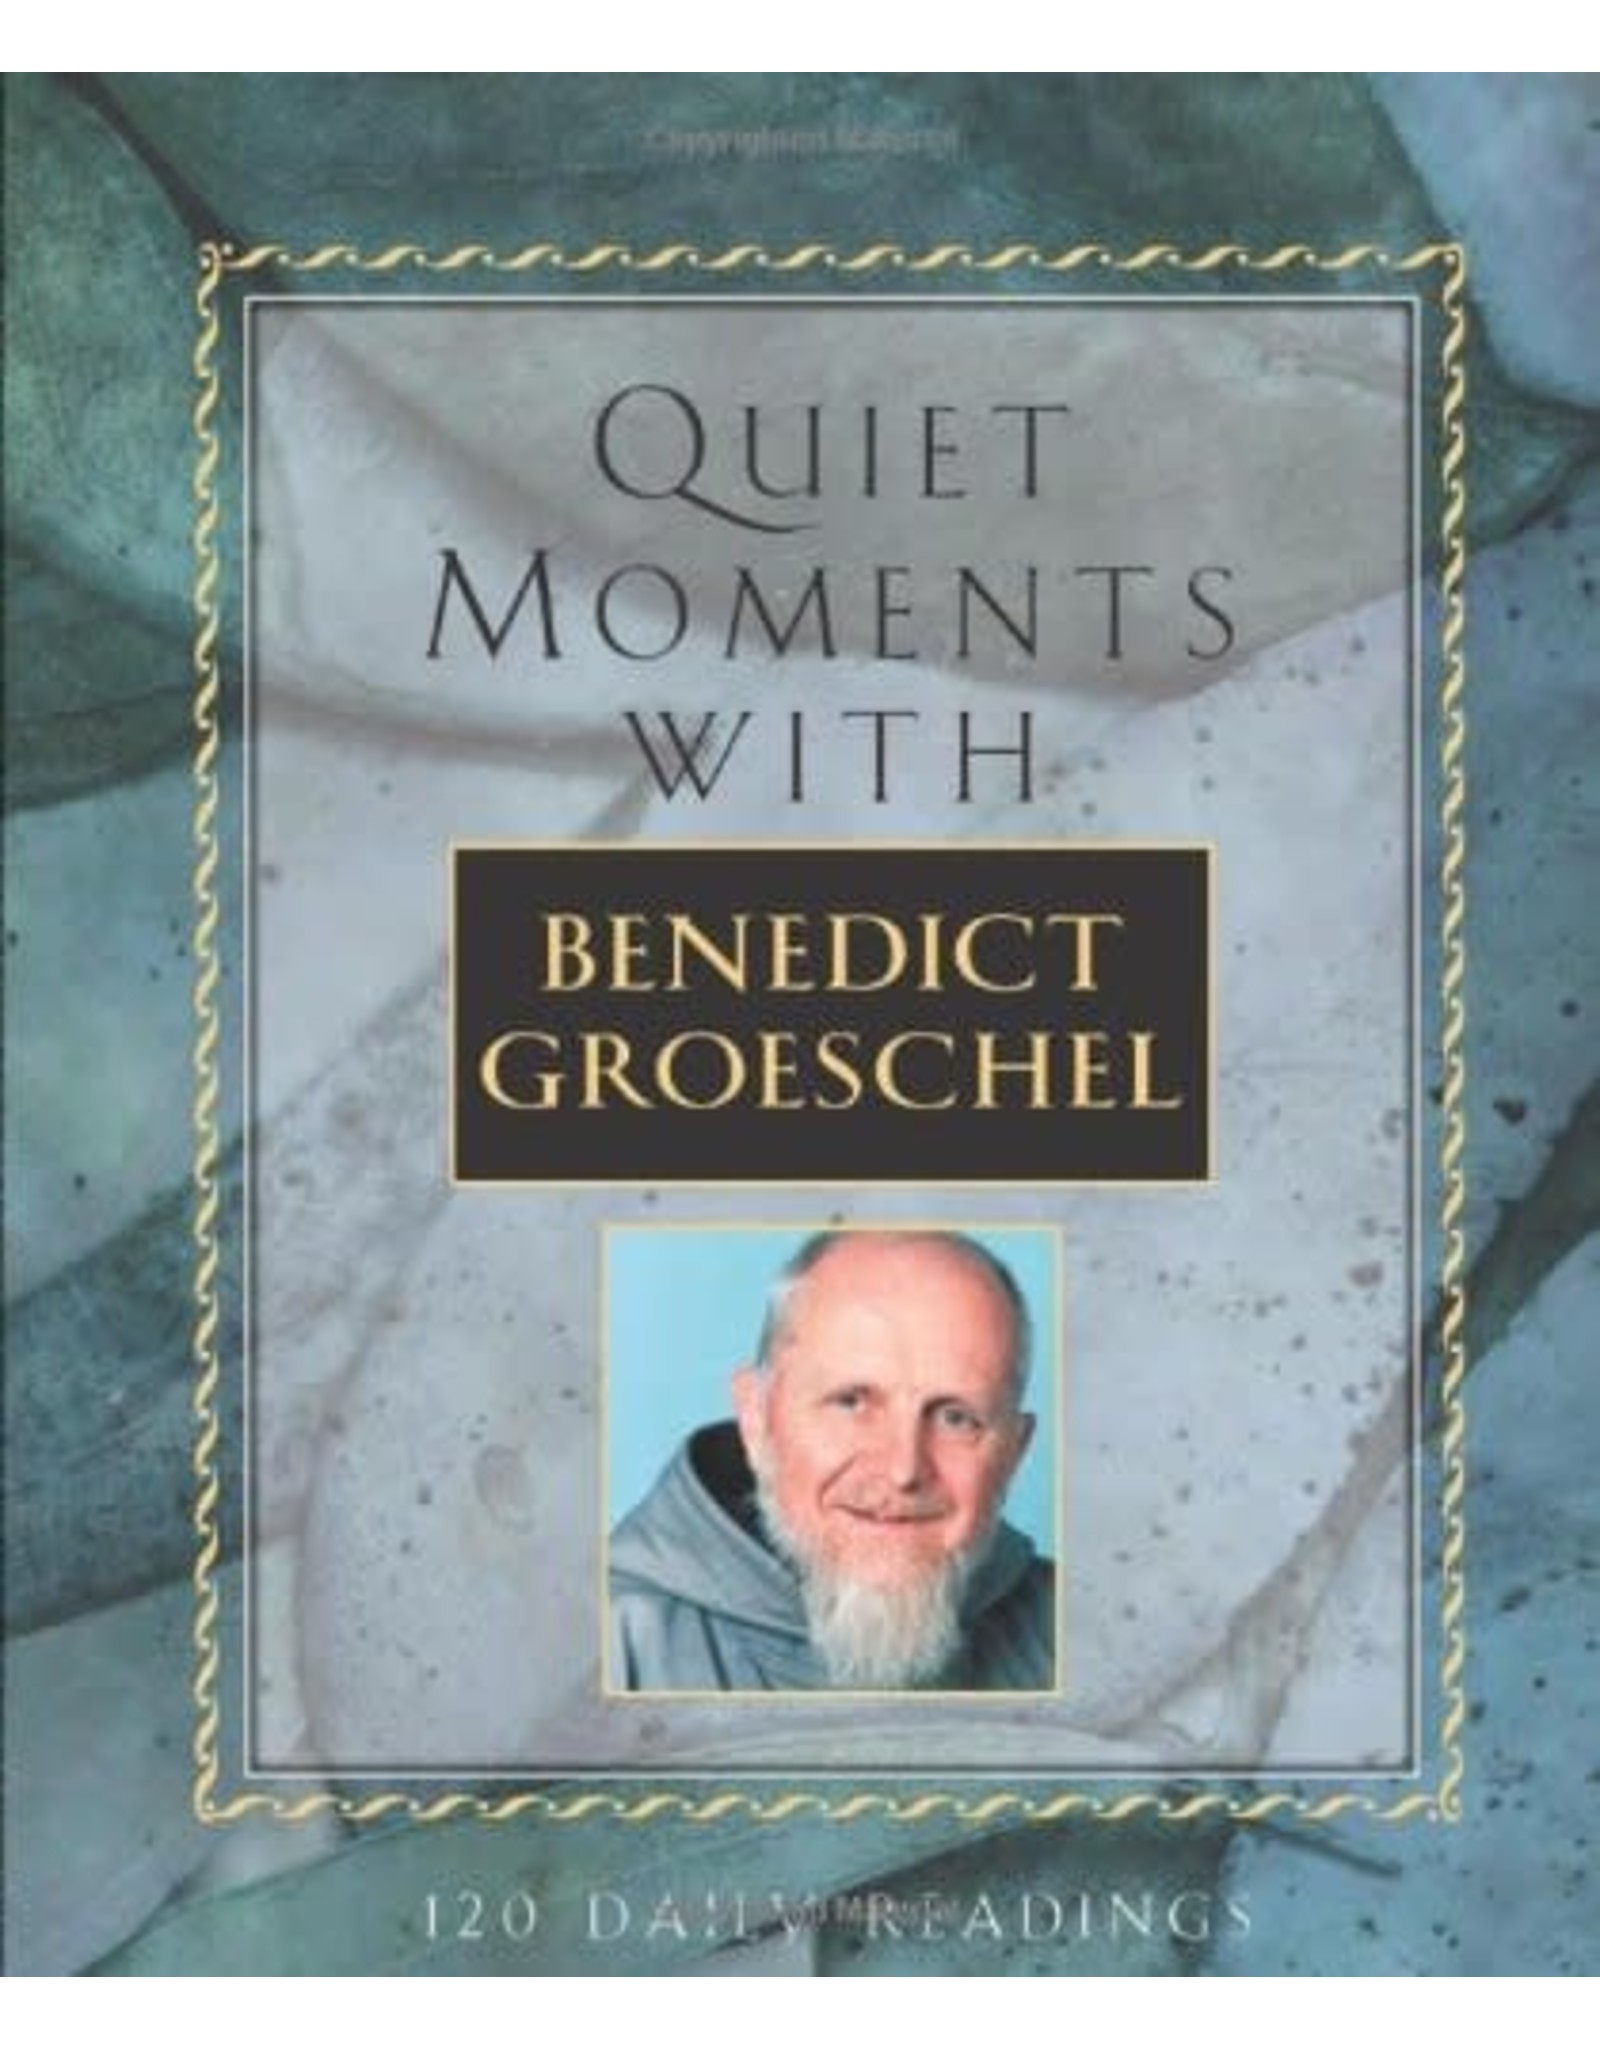 Franciscan Media Quiet Moments with Benedict Groeschel: 120 Daily Readings (Paperback)